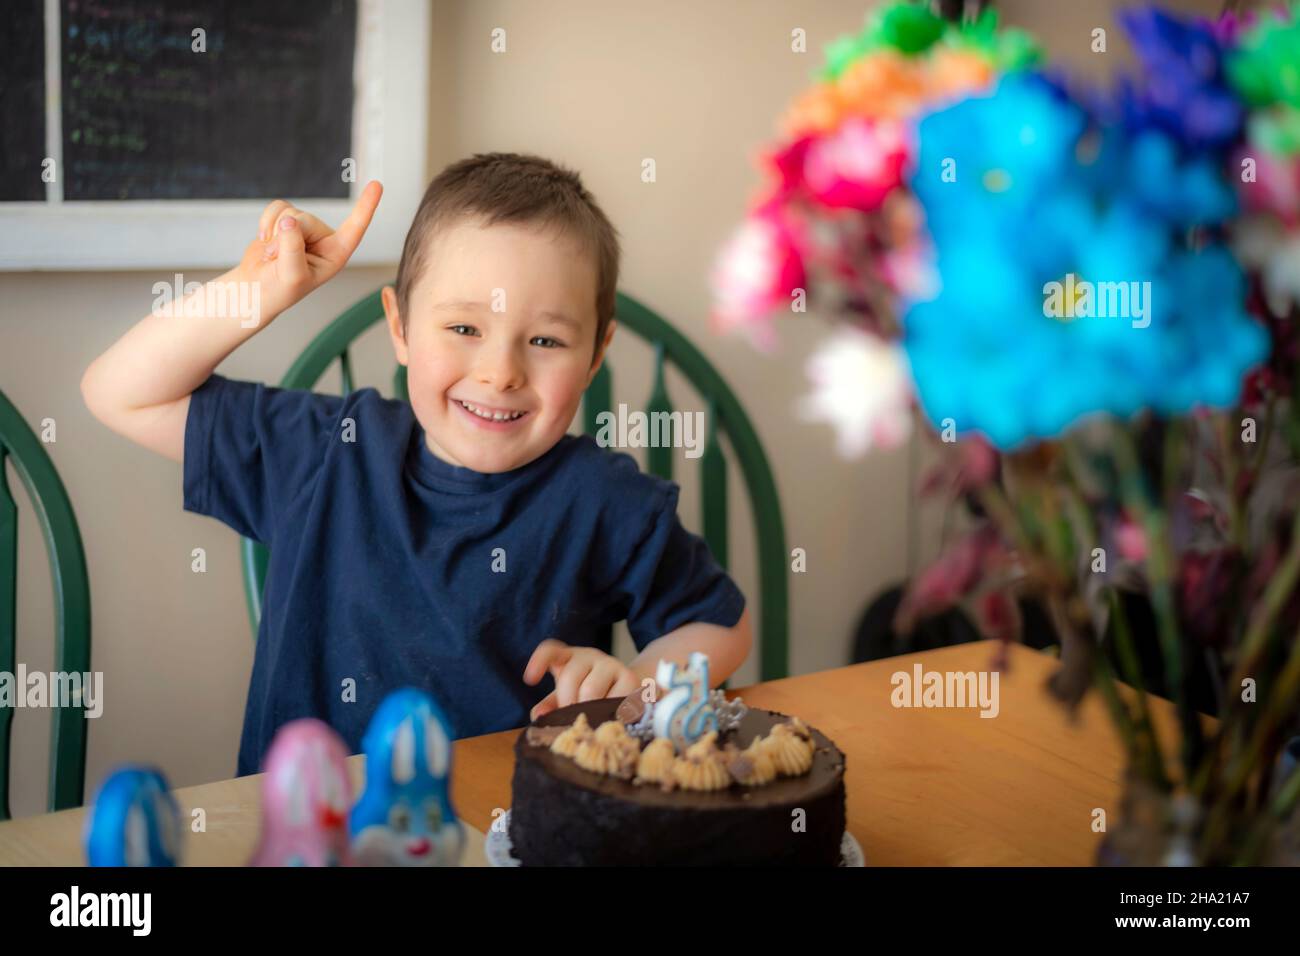 Boy celebrating his 5 years anniversary at a table with a cake and a candle in the form of figure 5 Stock Photo